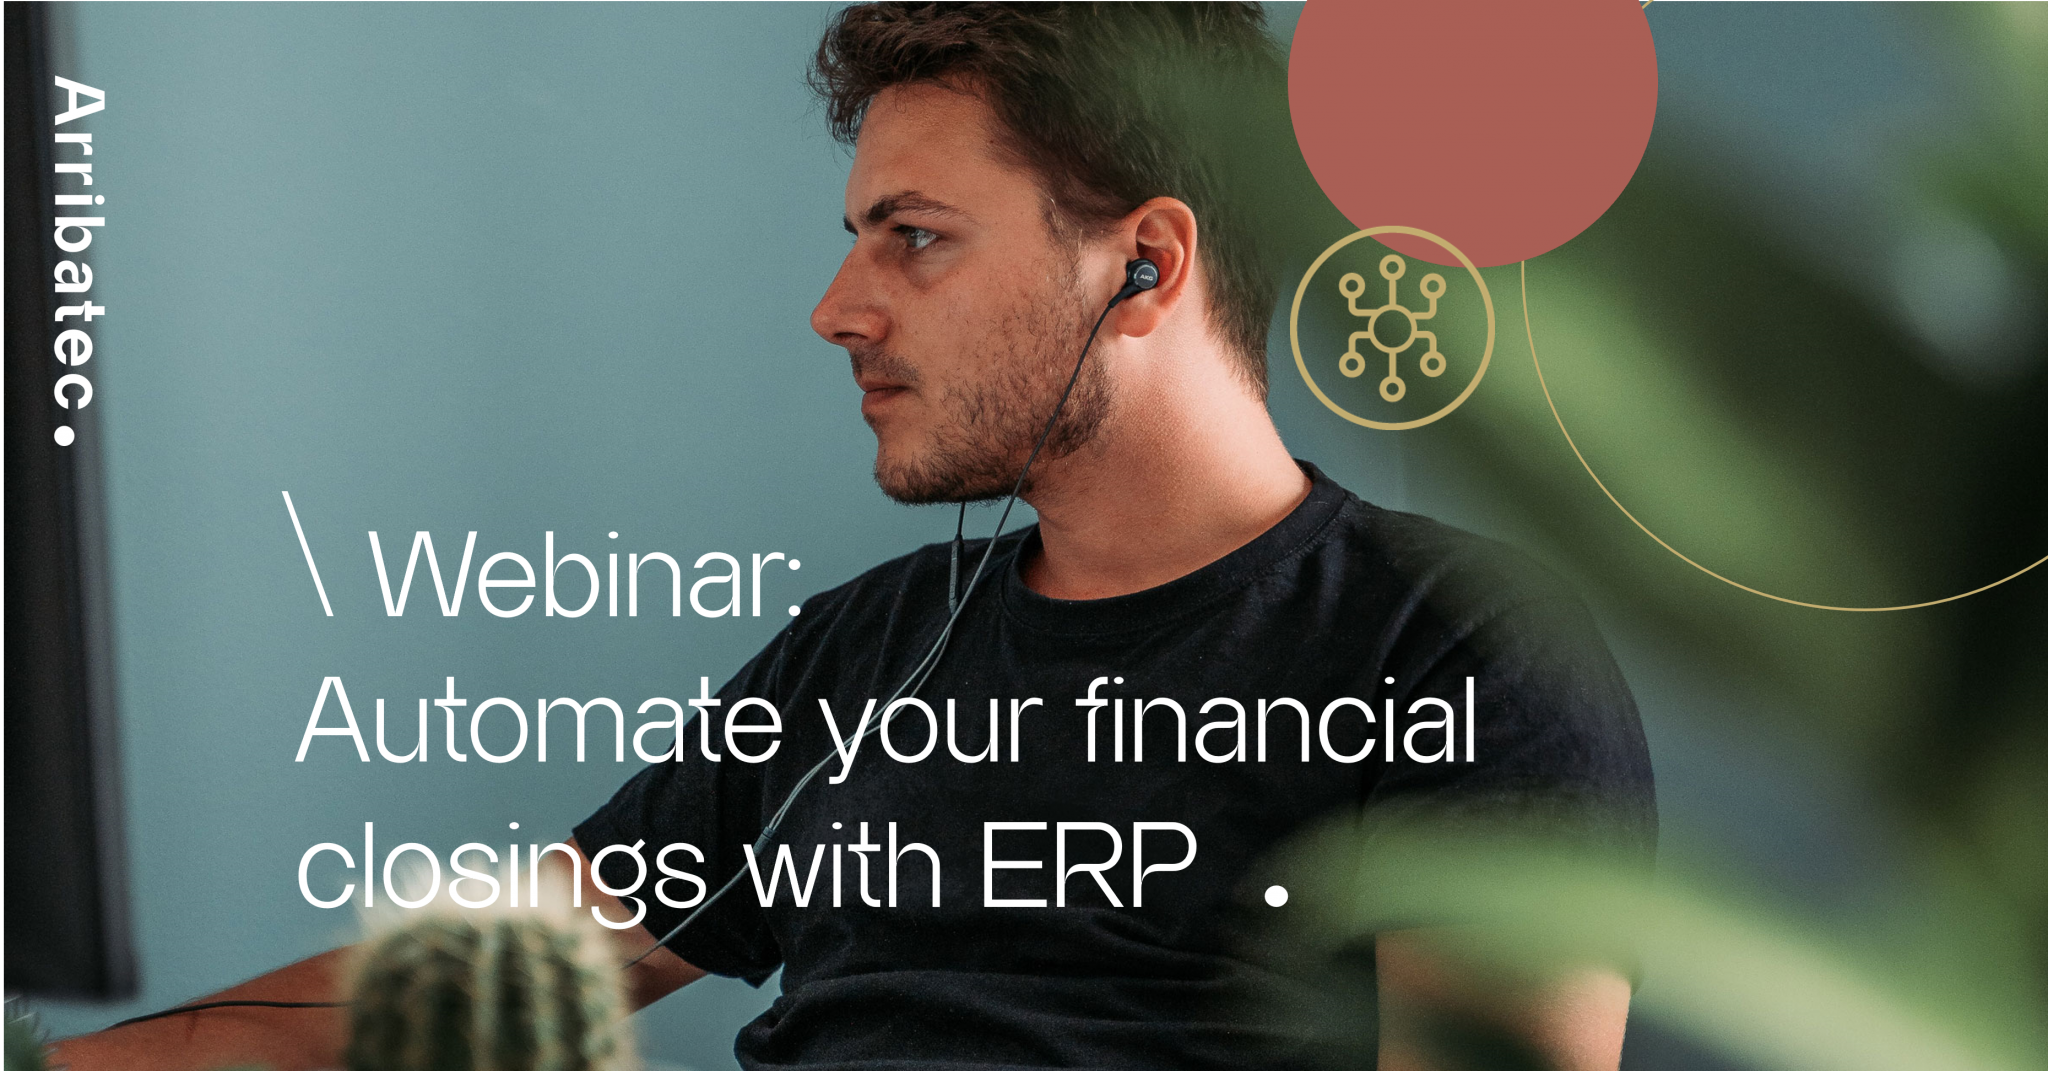 automate your financial closings with ERP